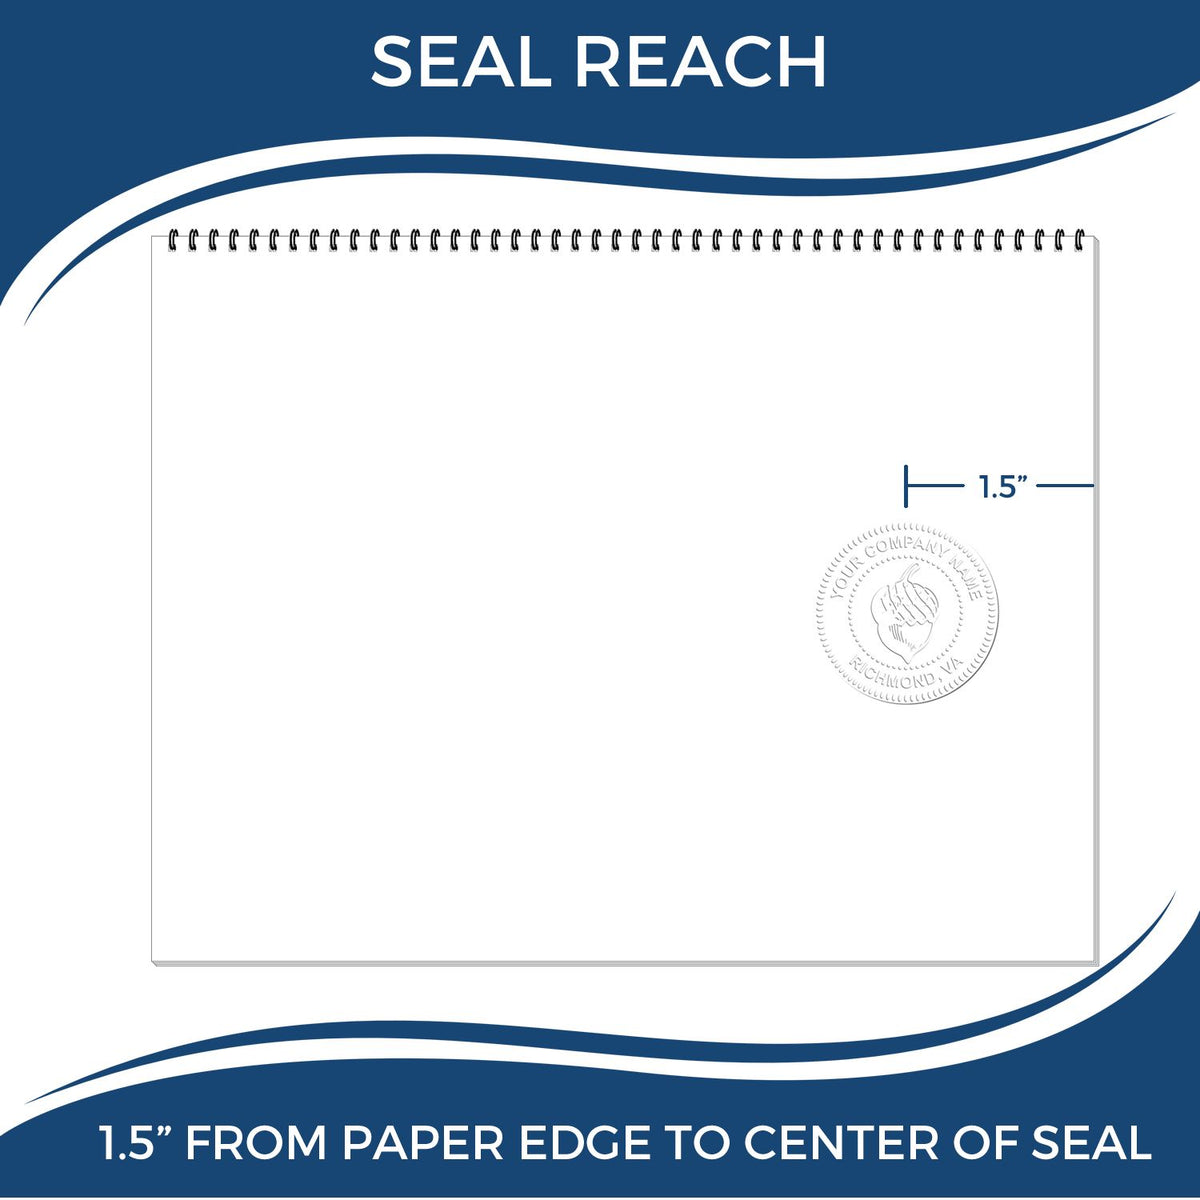 An infographic showing the seal reach which is represented by a ruler and a miniature seal image of the Vermont Geologist Desk Seal